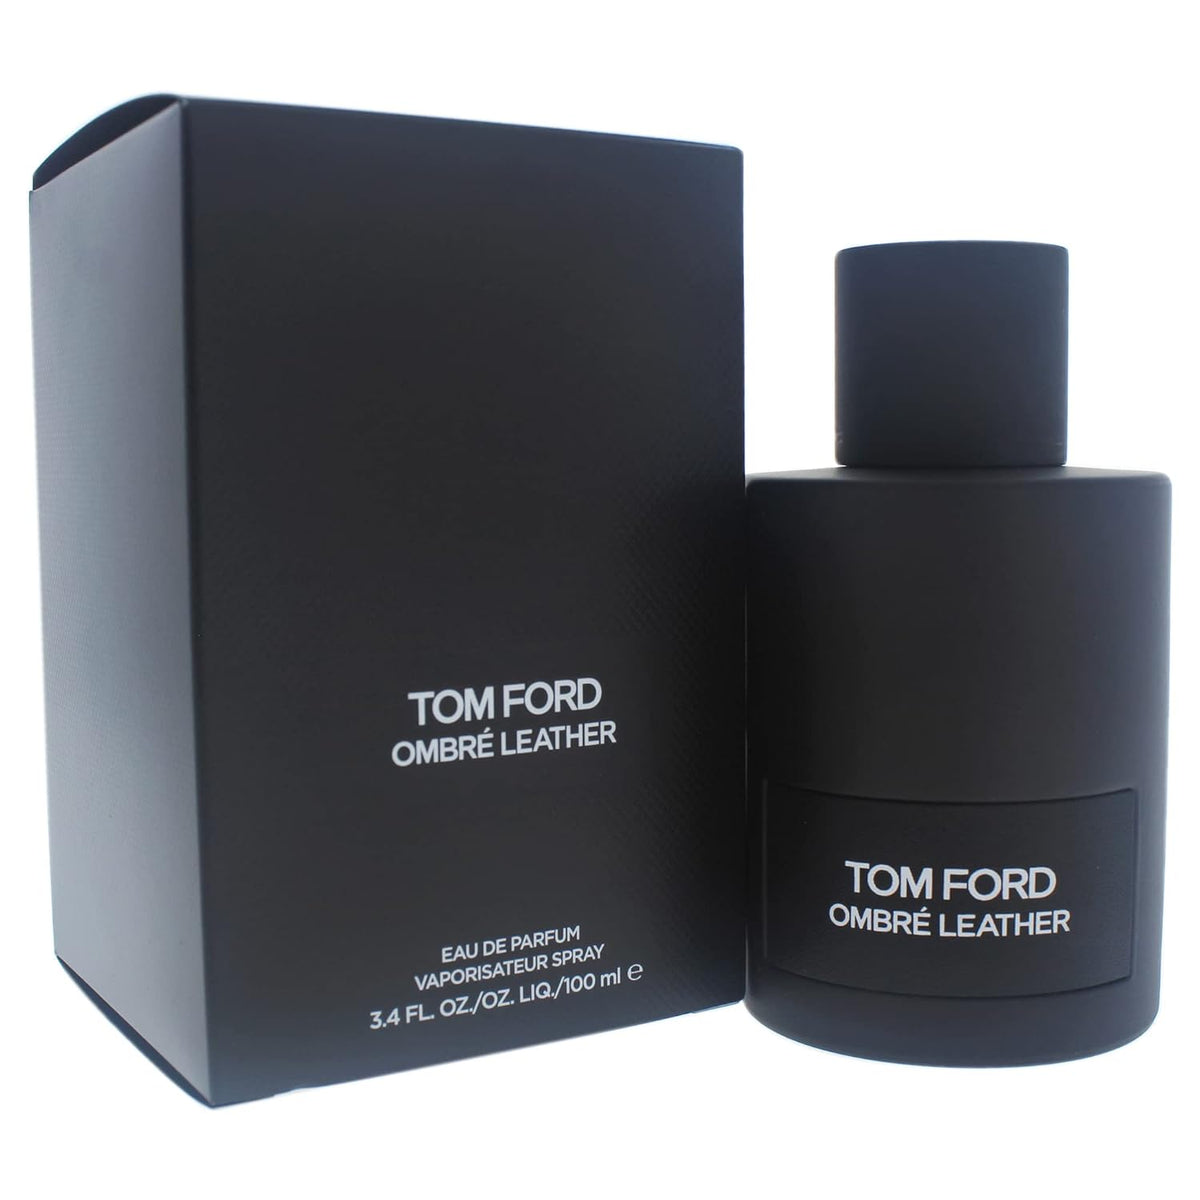 Tom Ford Ombre Leather EDP Spray for Men